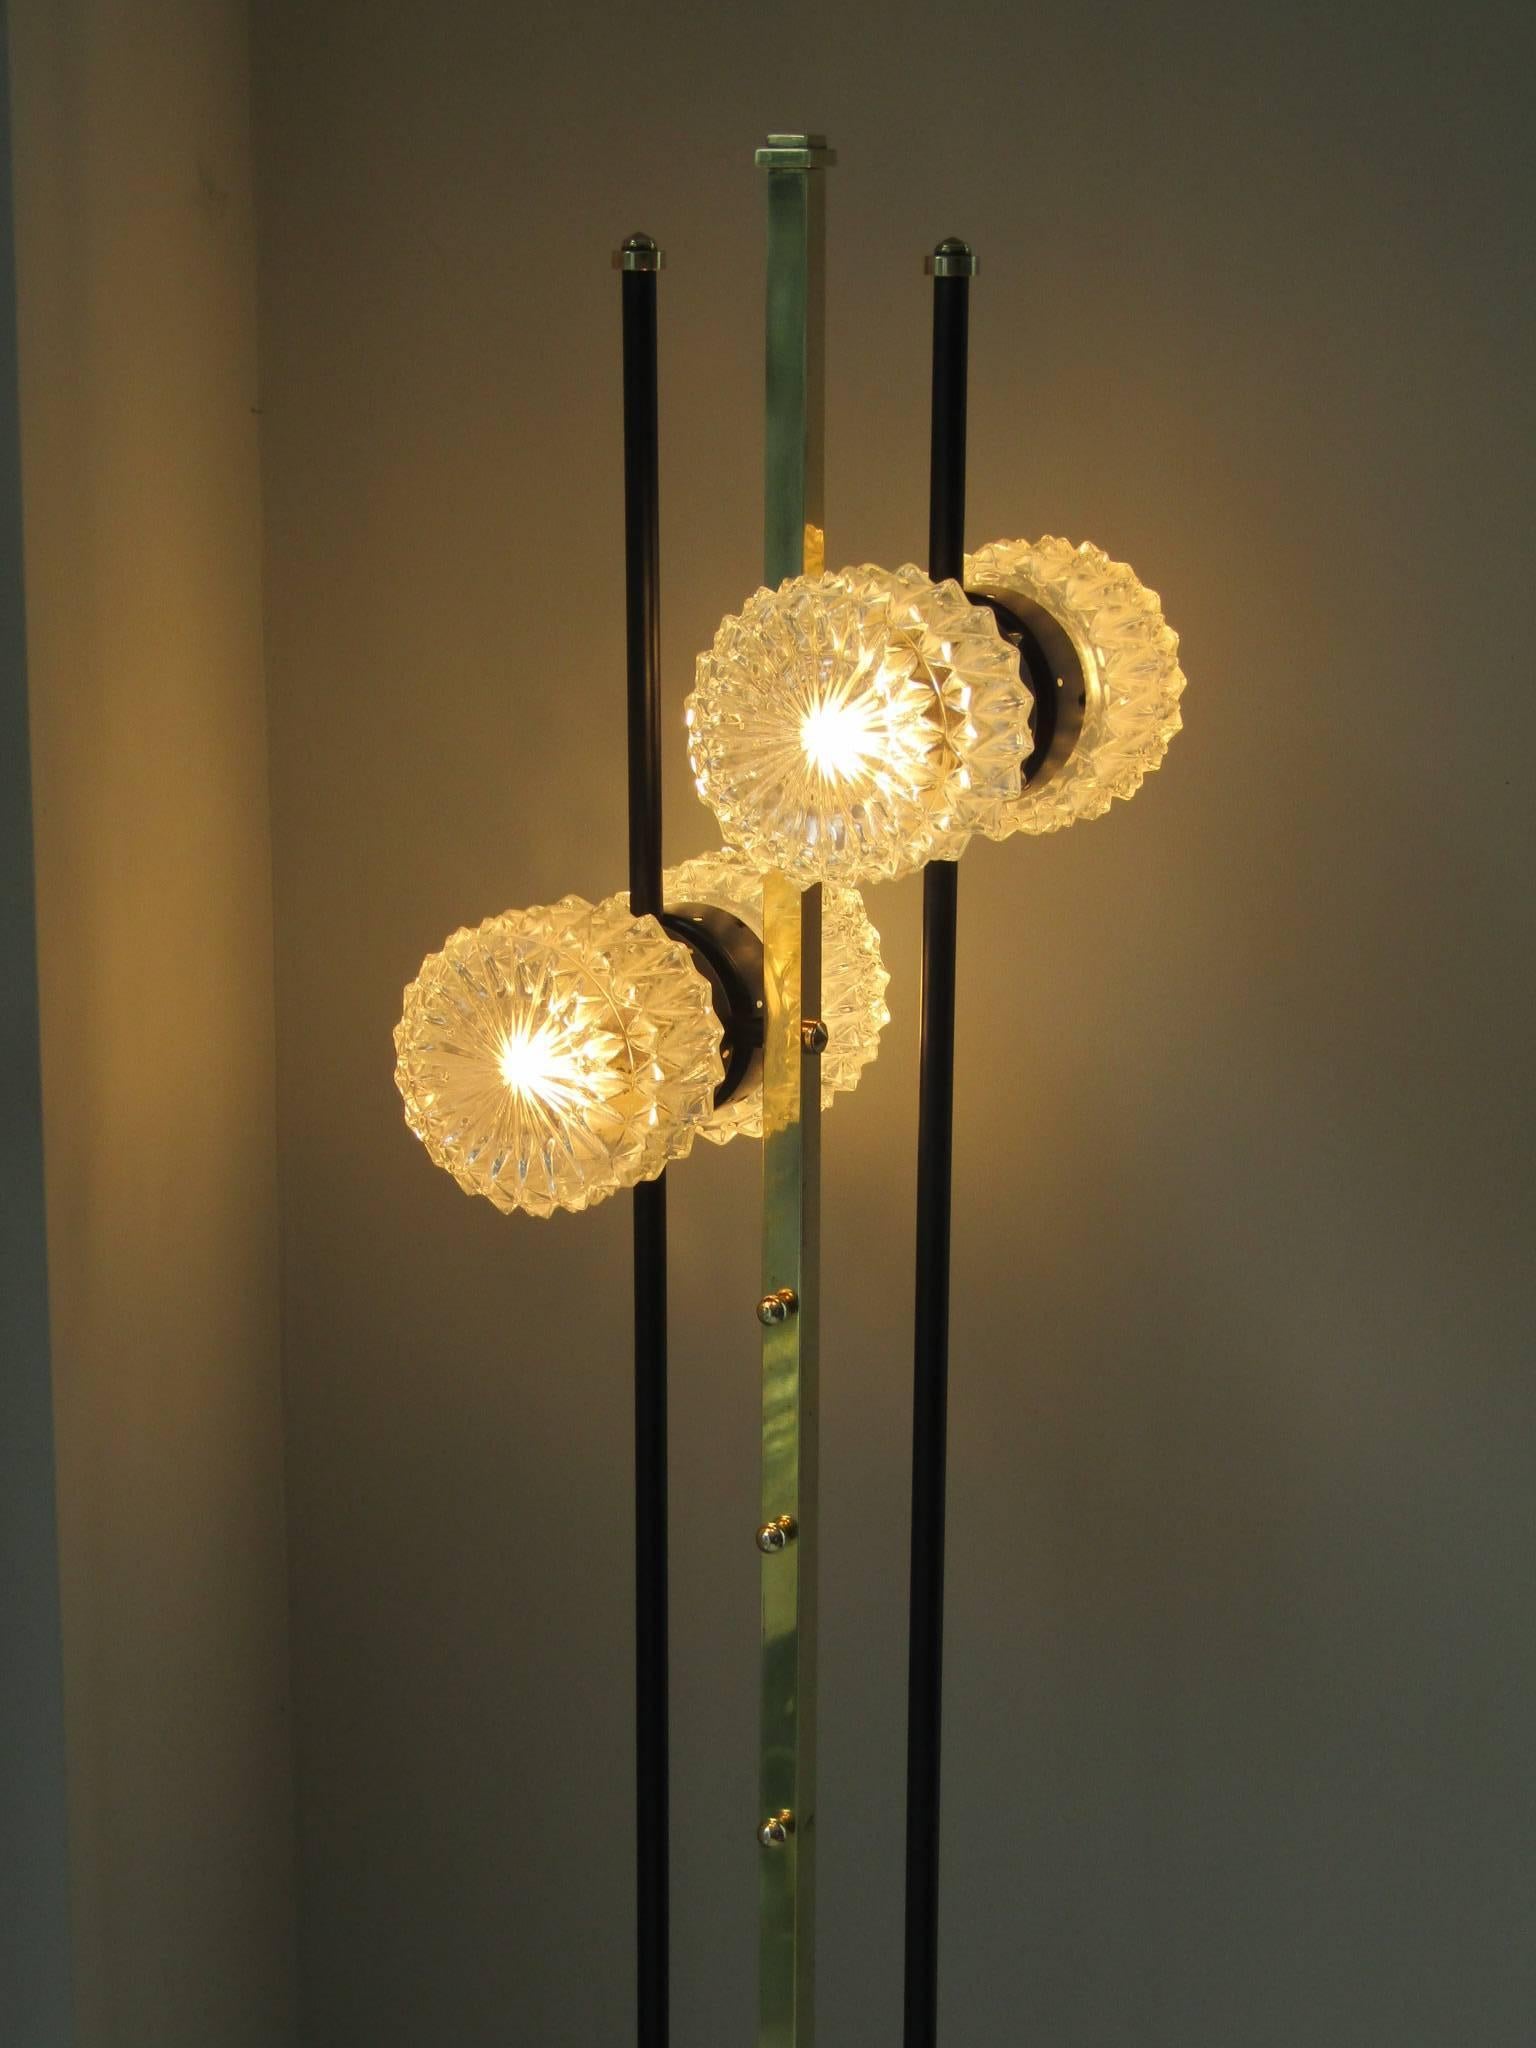 Arlus 1960s floor lamp with crystal cut shades, France. Full restored and rewired condition.

Note: Very sculptural appearence with late 1960s chic!

We offer door to door shipping! Please ask for your quote!